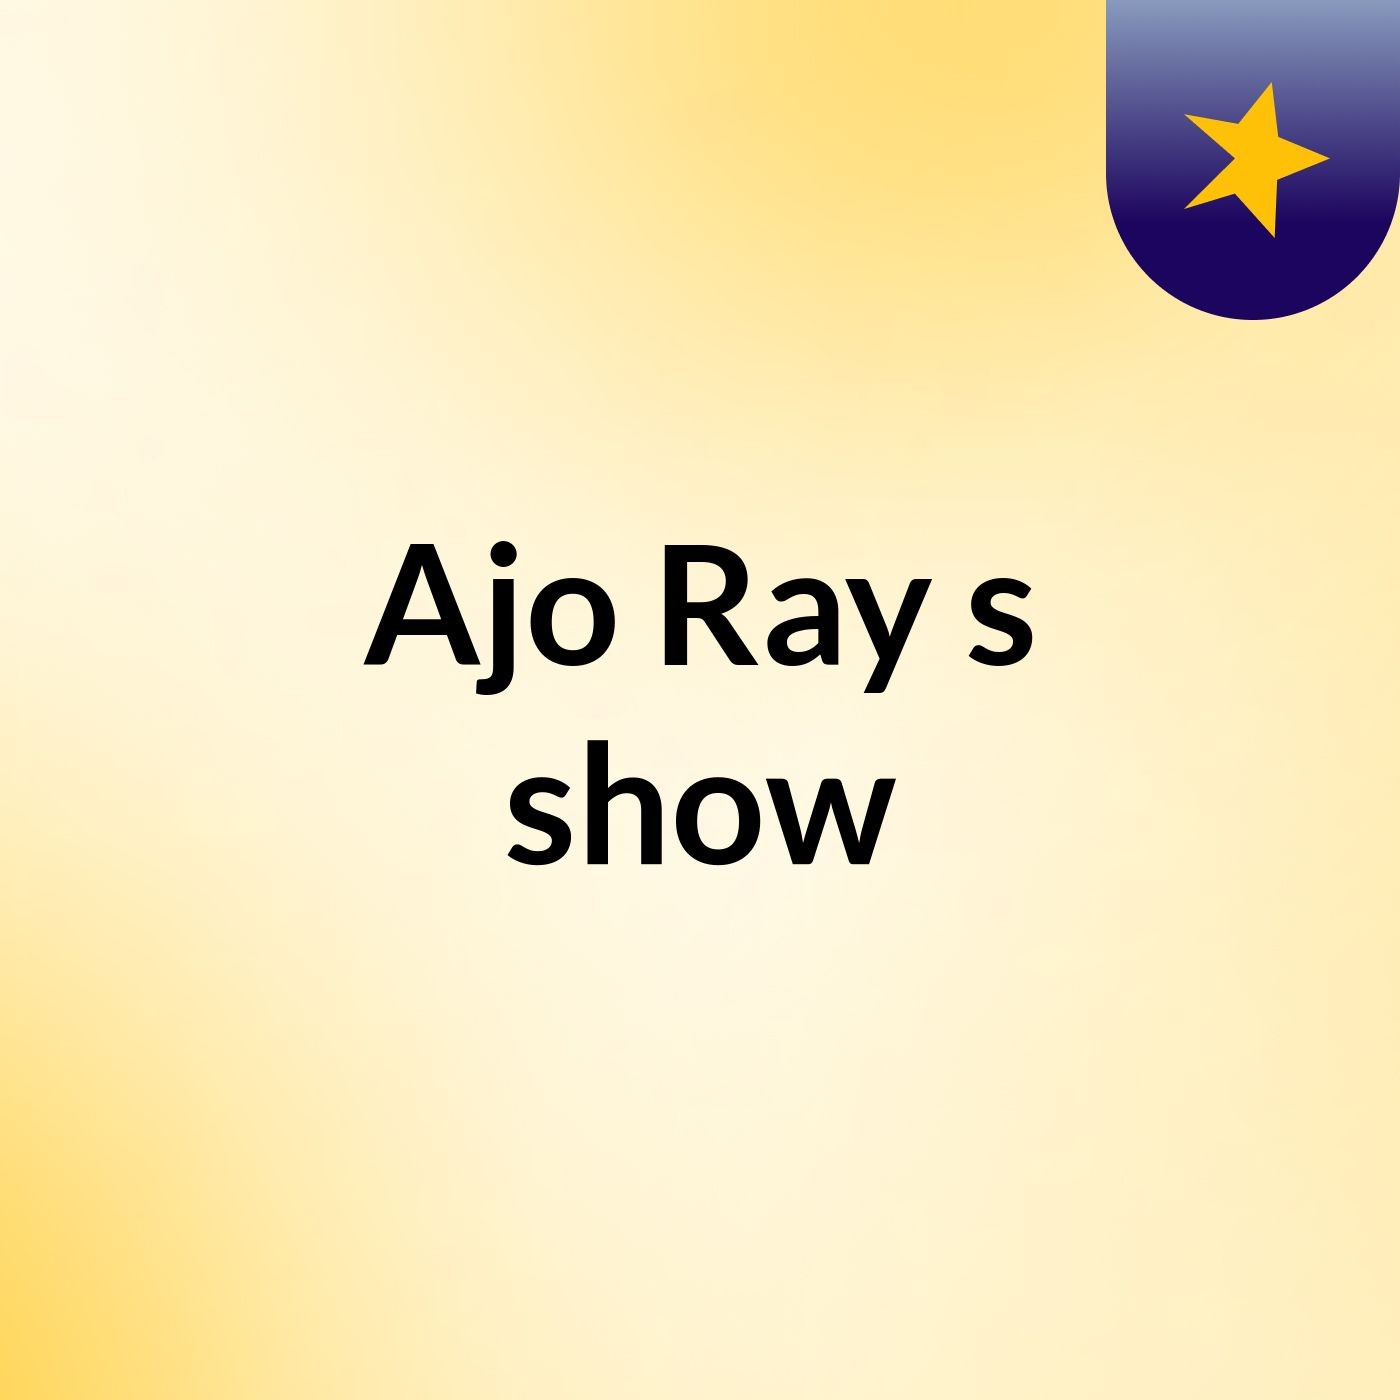 Ajo Ray's show